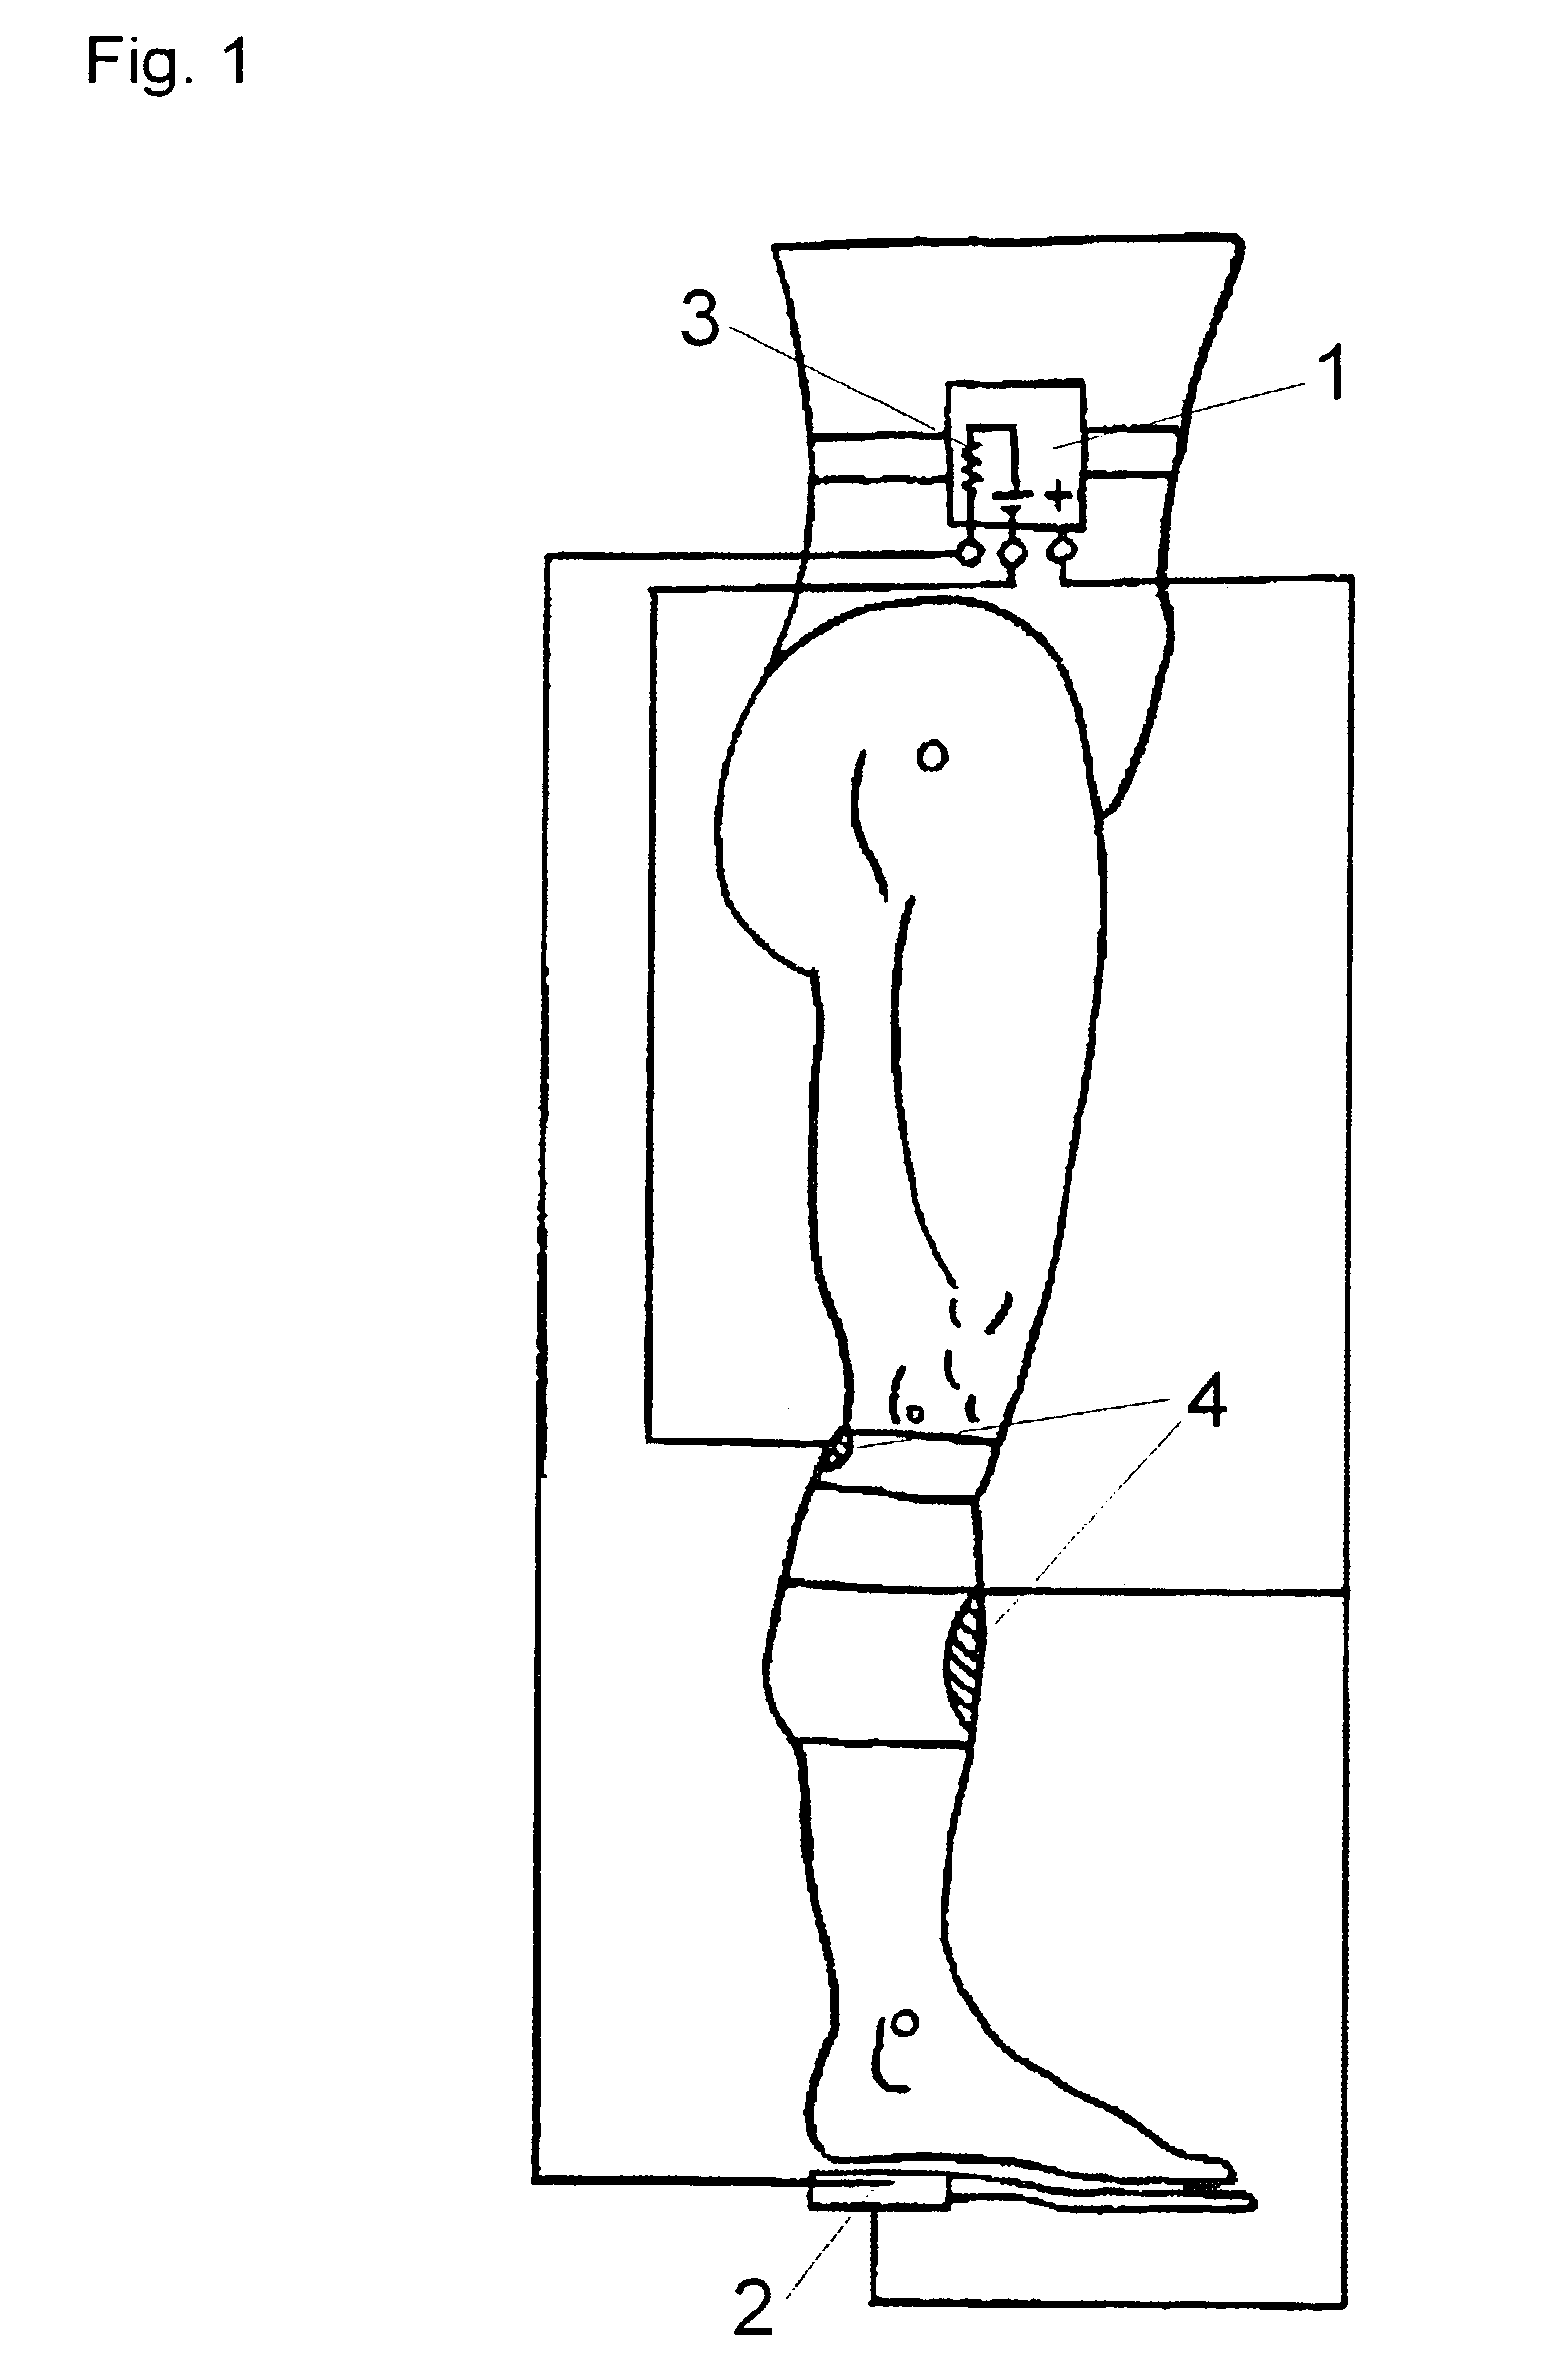 Method and implantable systems for neural sensing and nerve stimulation